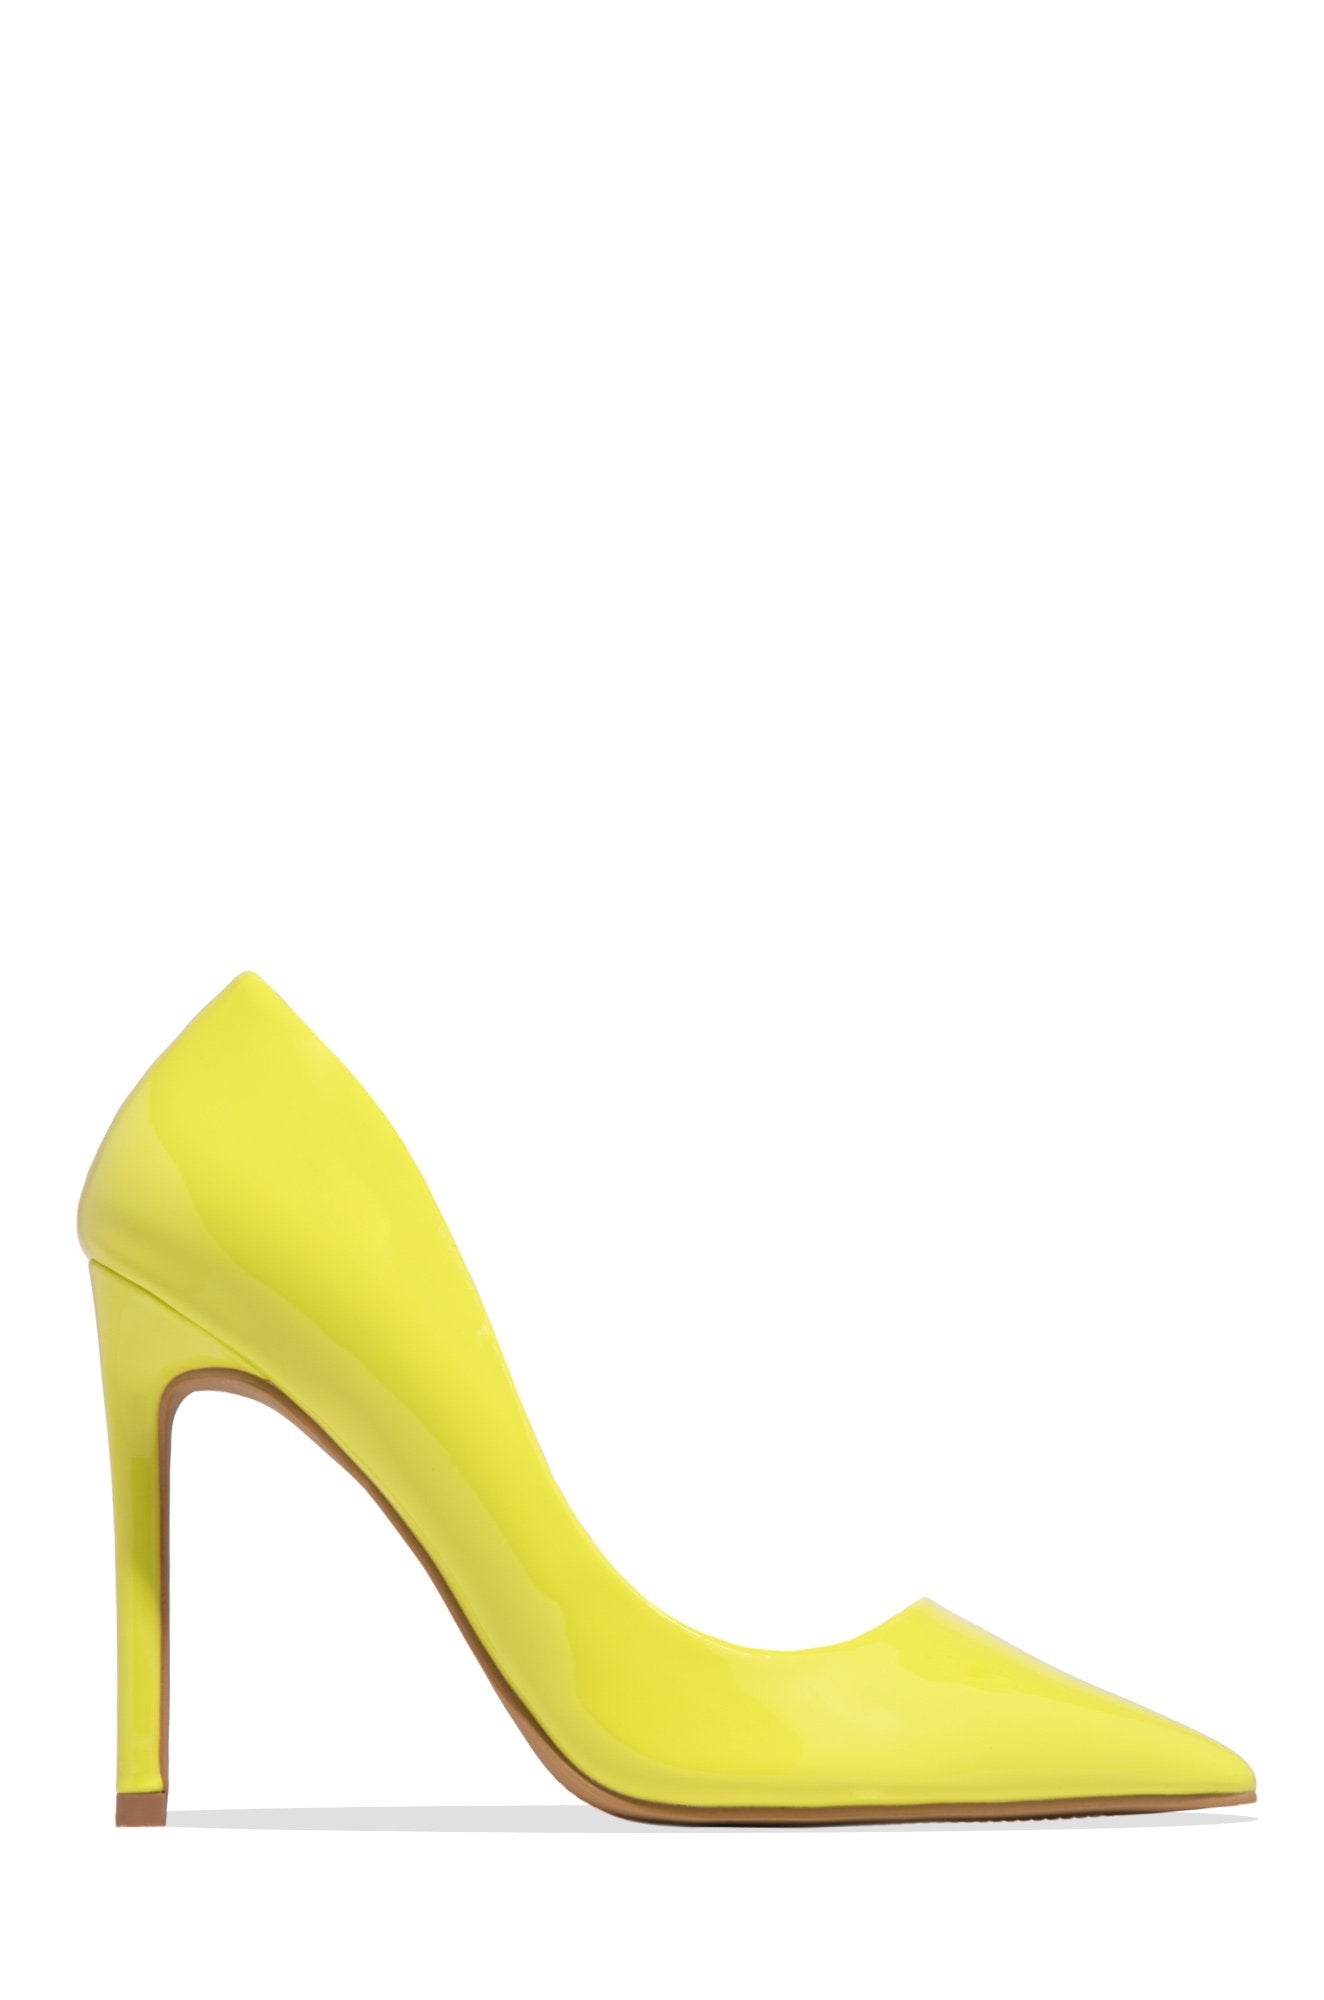 How to Wear Yellow Shoes [15 Suggestions with Pictures!] - StyleCheer.com |  Yellow shoes heels, Edgy shoes, Yellow heels outfit